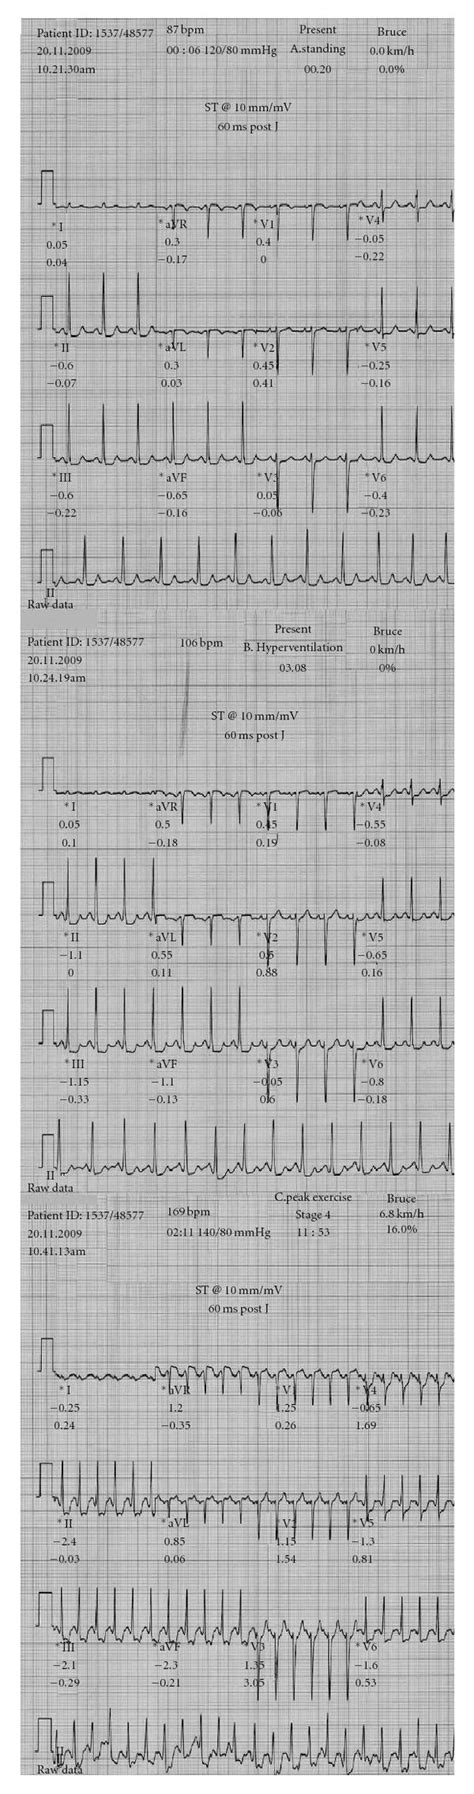 Electrocardiographic Ecg Recordings From A 48 Year Old Woman With Download Scientific Diagram